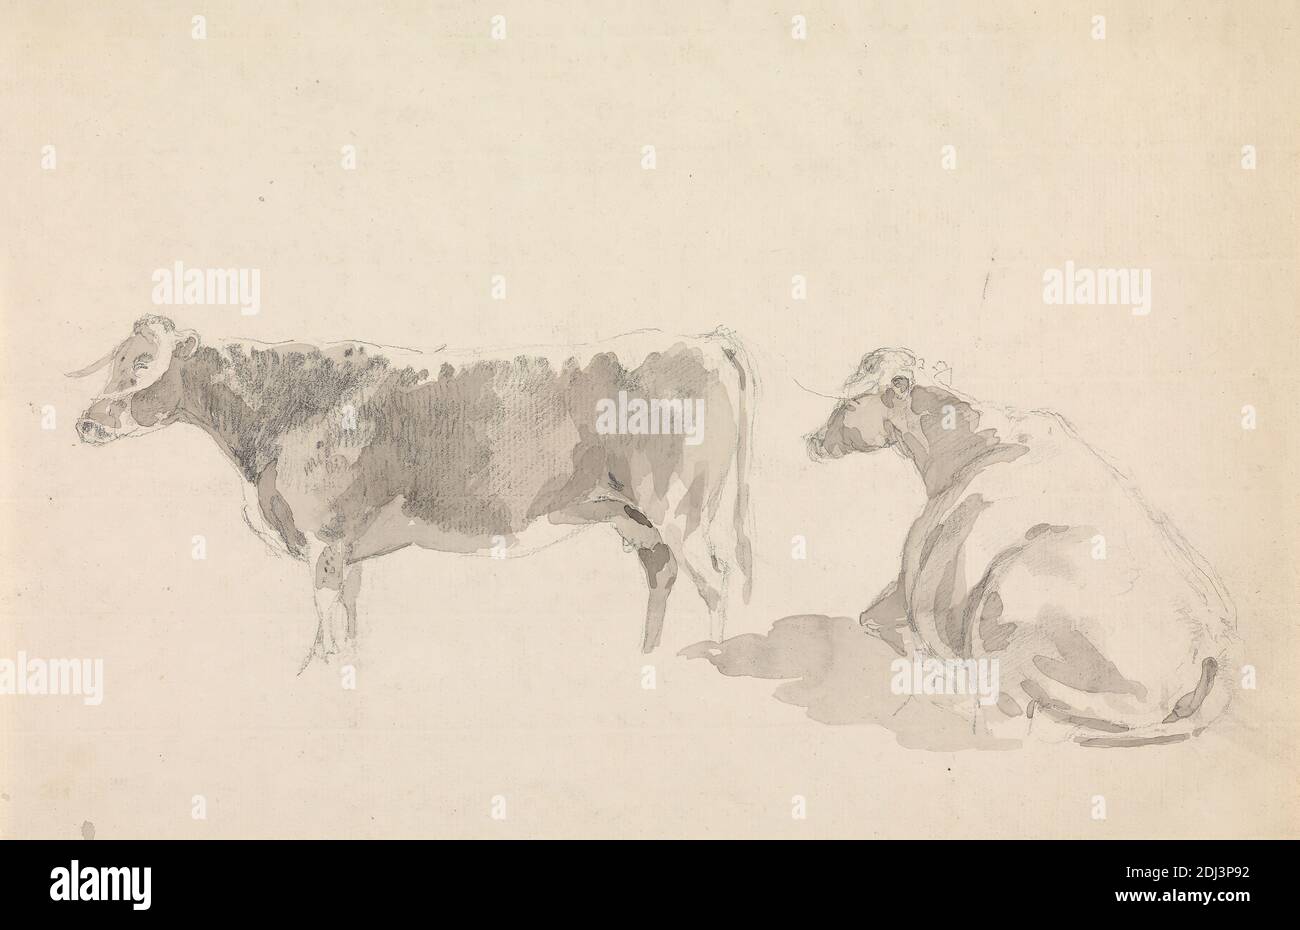 Studies of Cattle, Sawrey Gilpin, 1733–1807, British, undated, Graphite and gray wash on medium, moderately textured, cream, laid paper, Sheet: 7 7/8 × 12 1/8 inches (20 × 30.8 cm), animal art Stock Photo